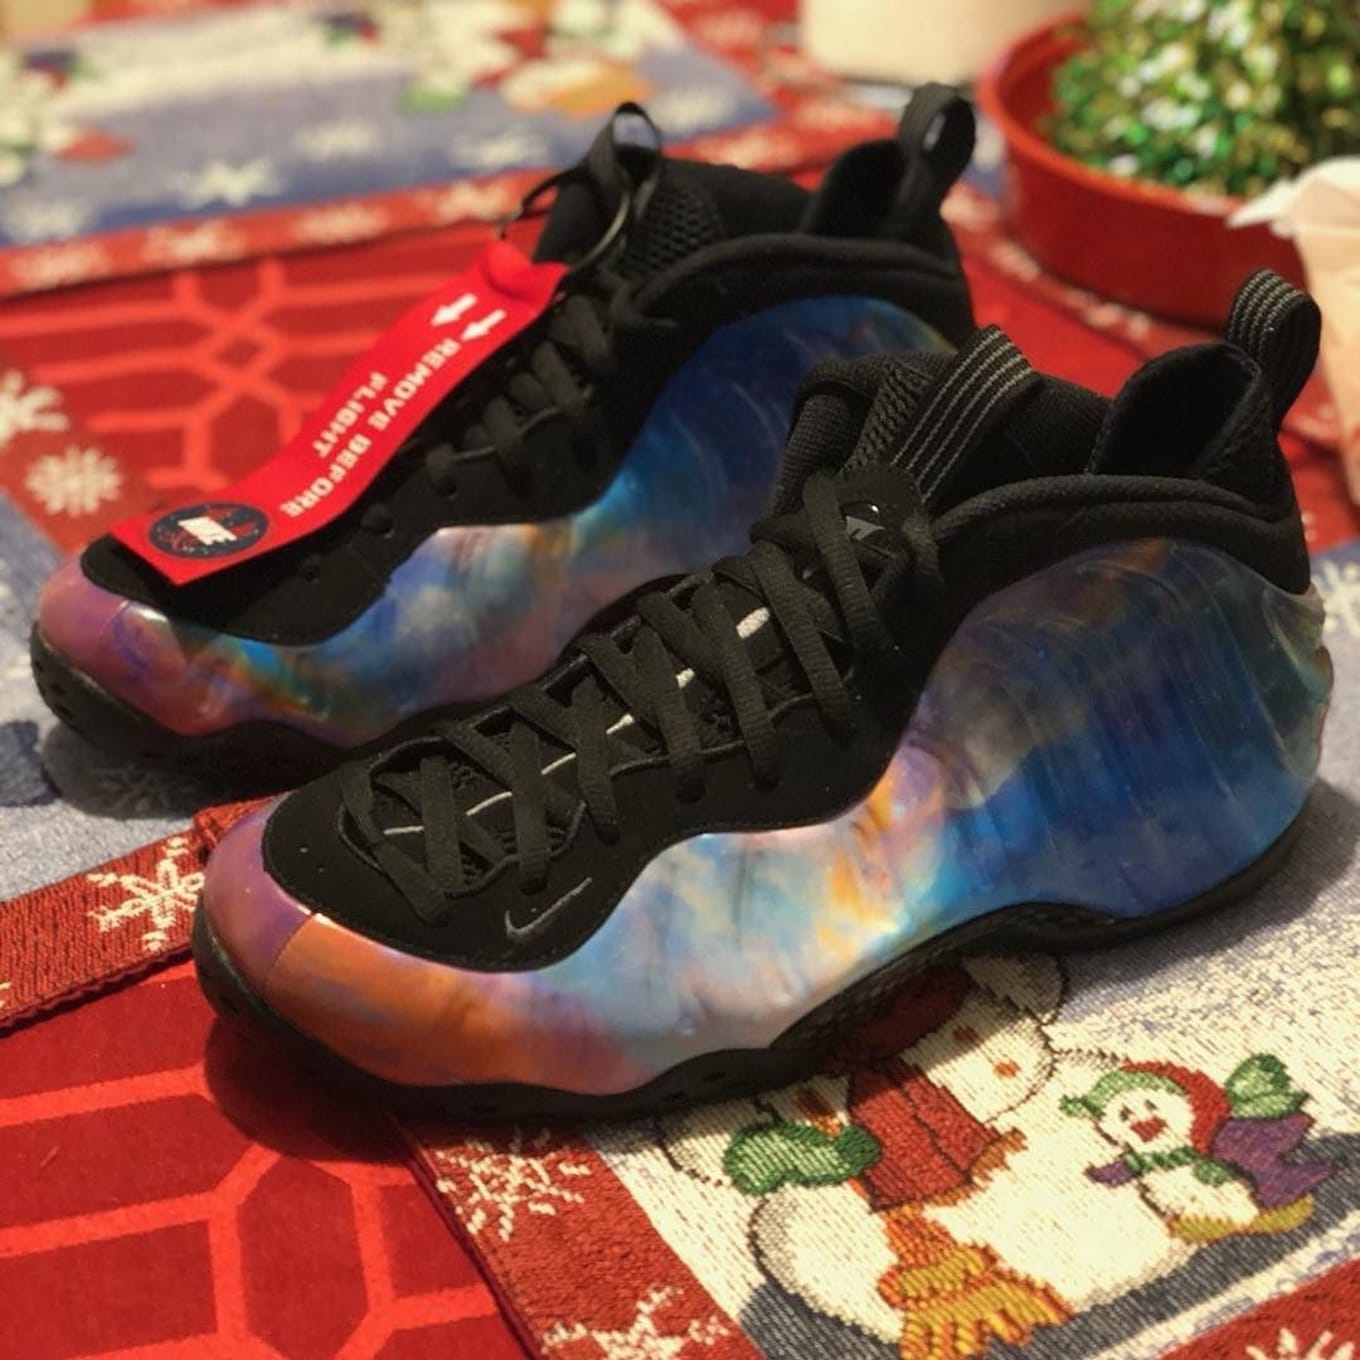 stainless pot Galaxy Nike Air Foamposite One Galaxy 2018 Release Date AR3771-800 | Sole Collector